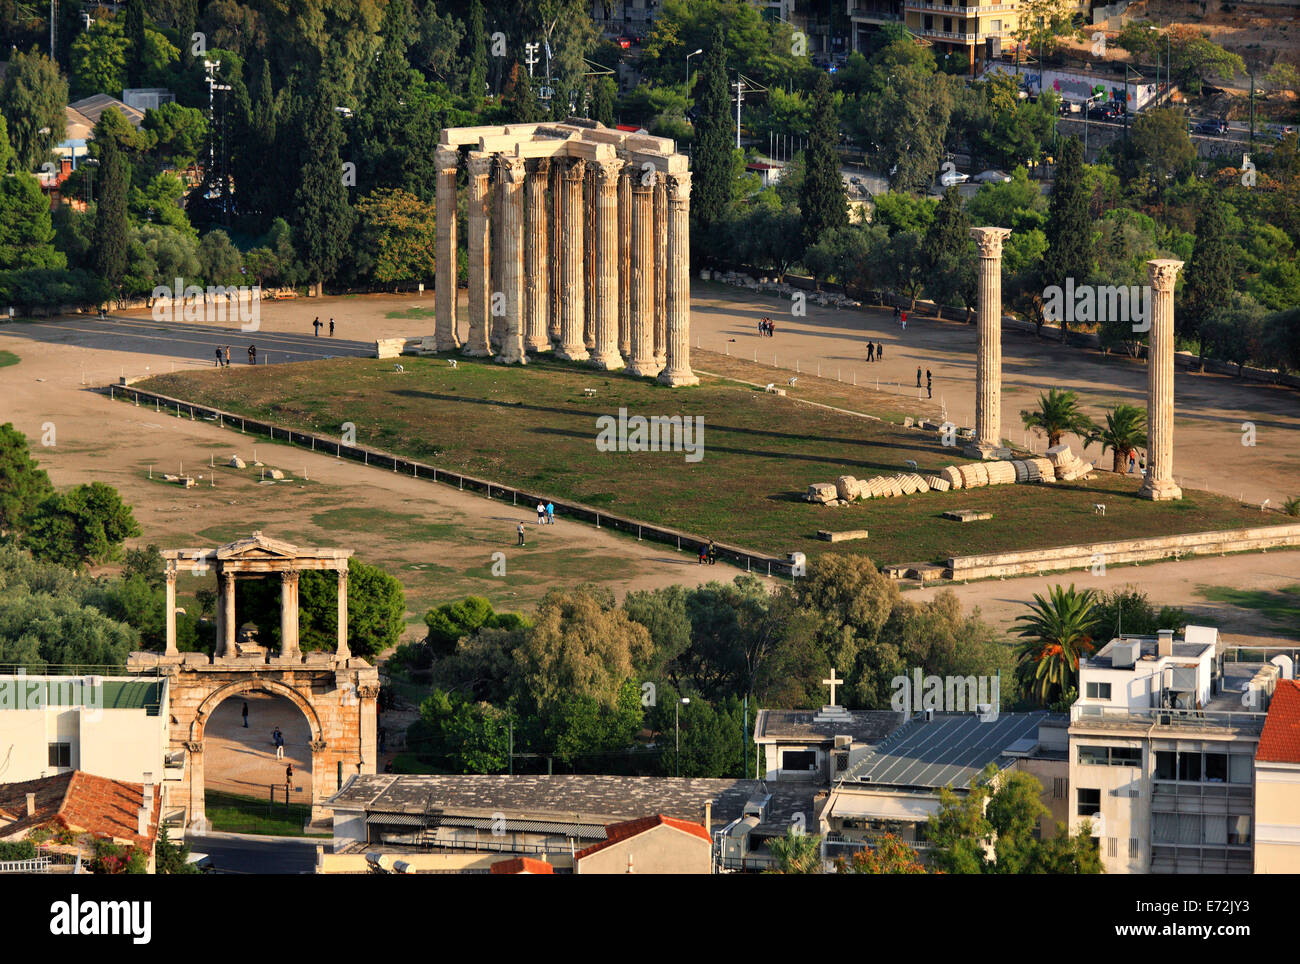 View of the Temple of Olympian Zeus and Hadrian's Gate from the Acropolis, Athens, Greece. Stock Photo